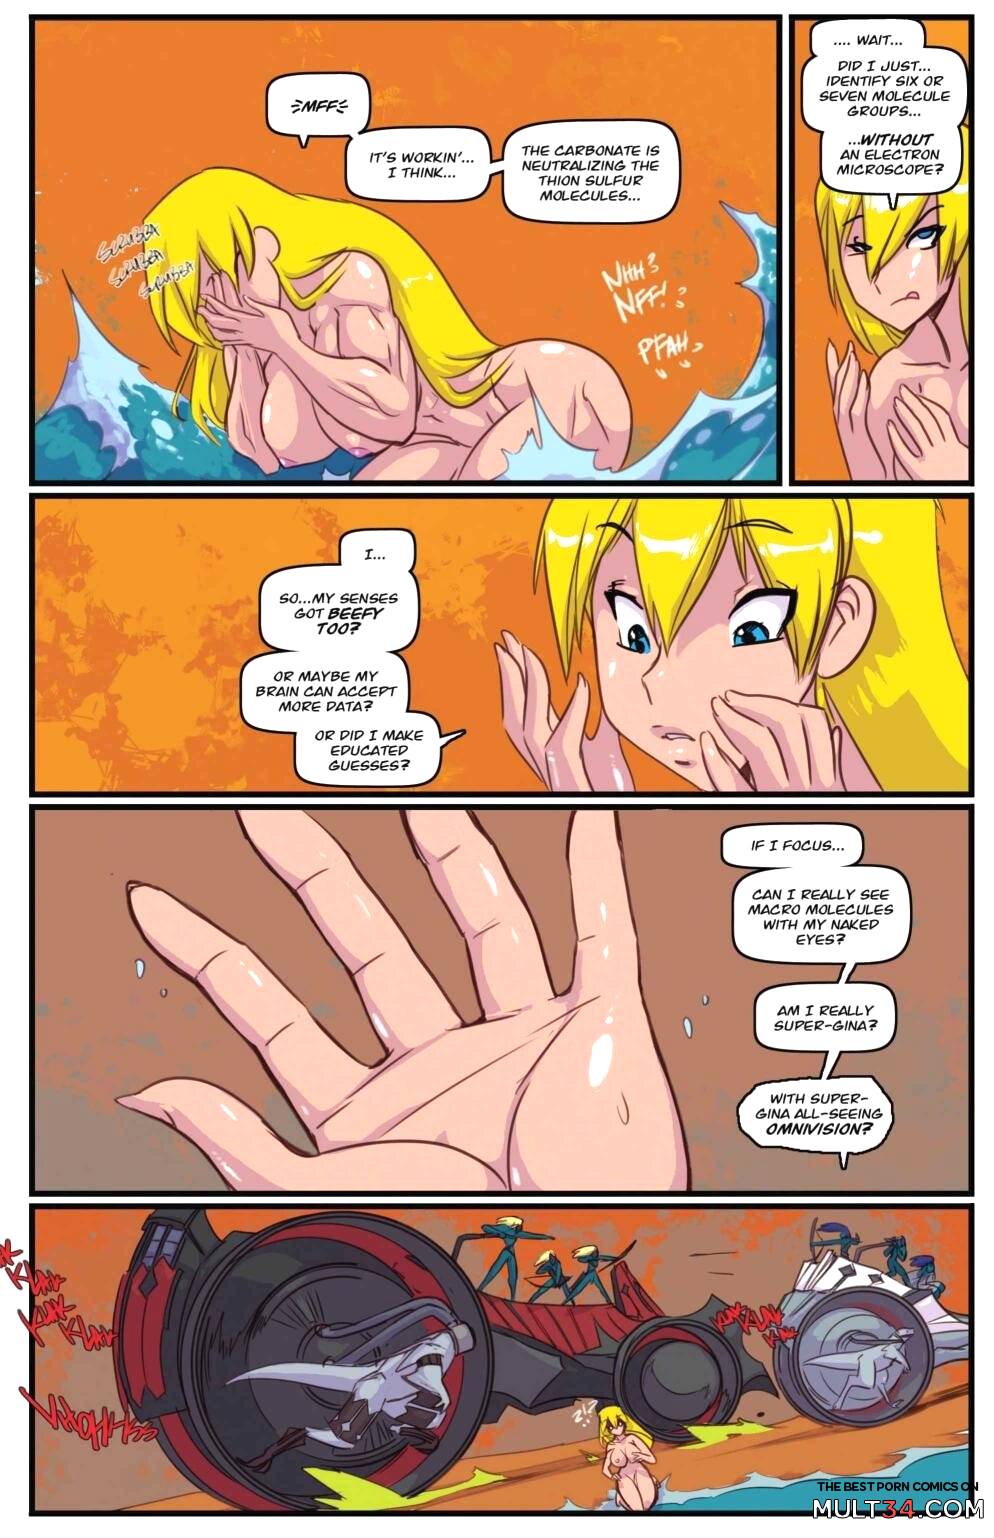 Gina Diggers Warnnerd of Mars page 12